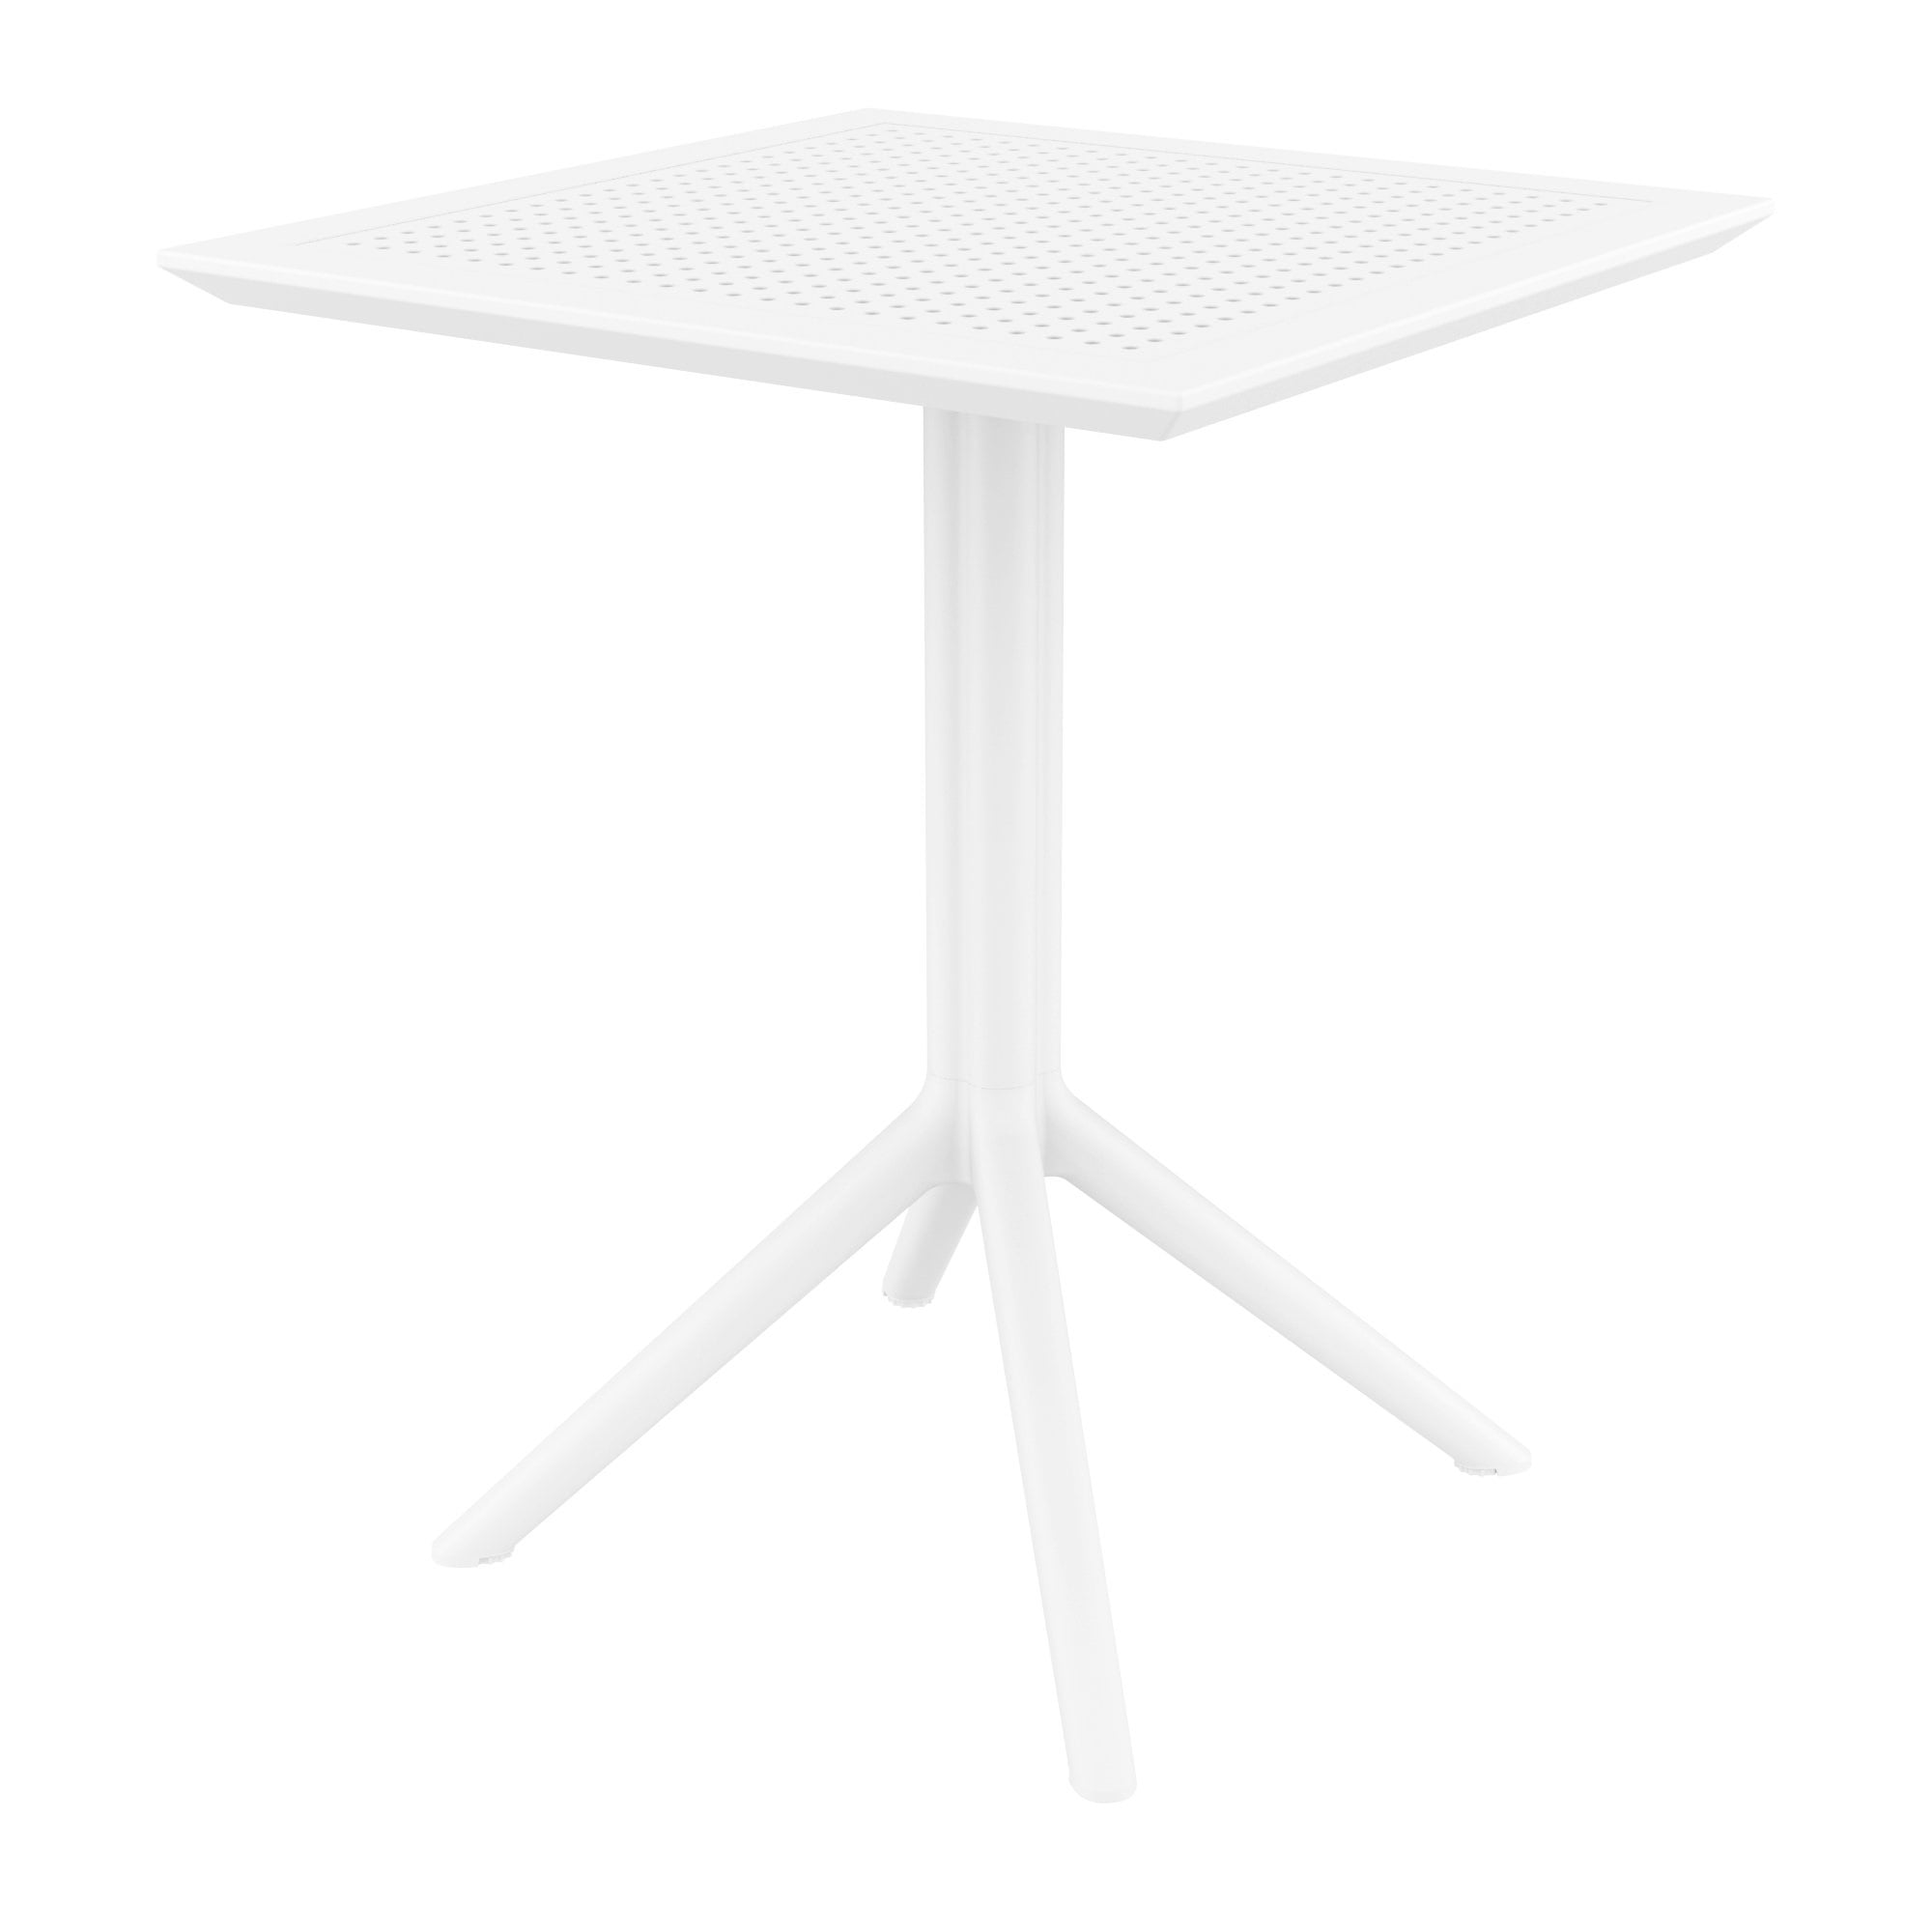 Isp114-whi 24 In. Sky Square Folding Table - White